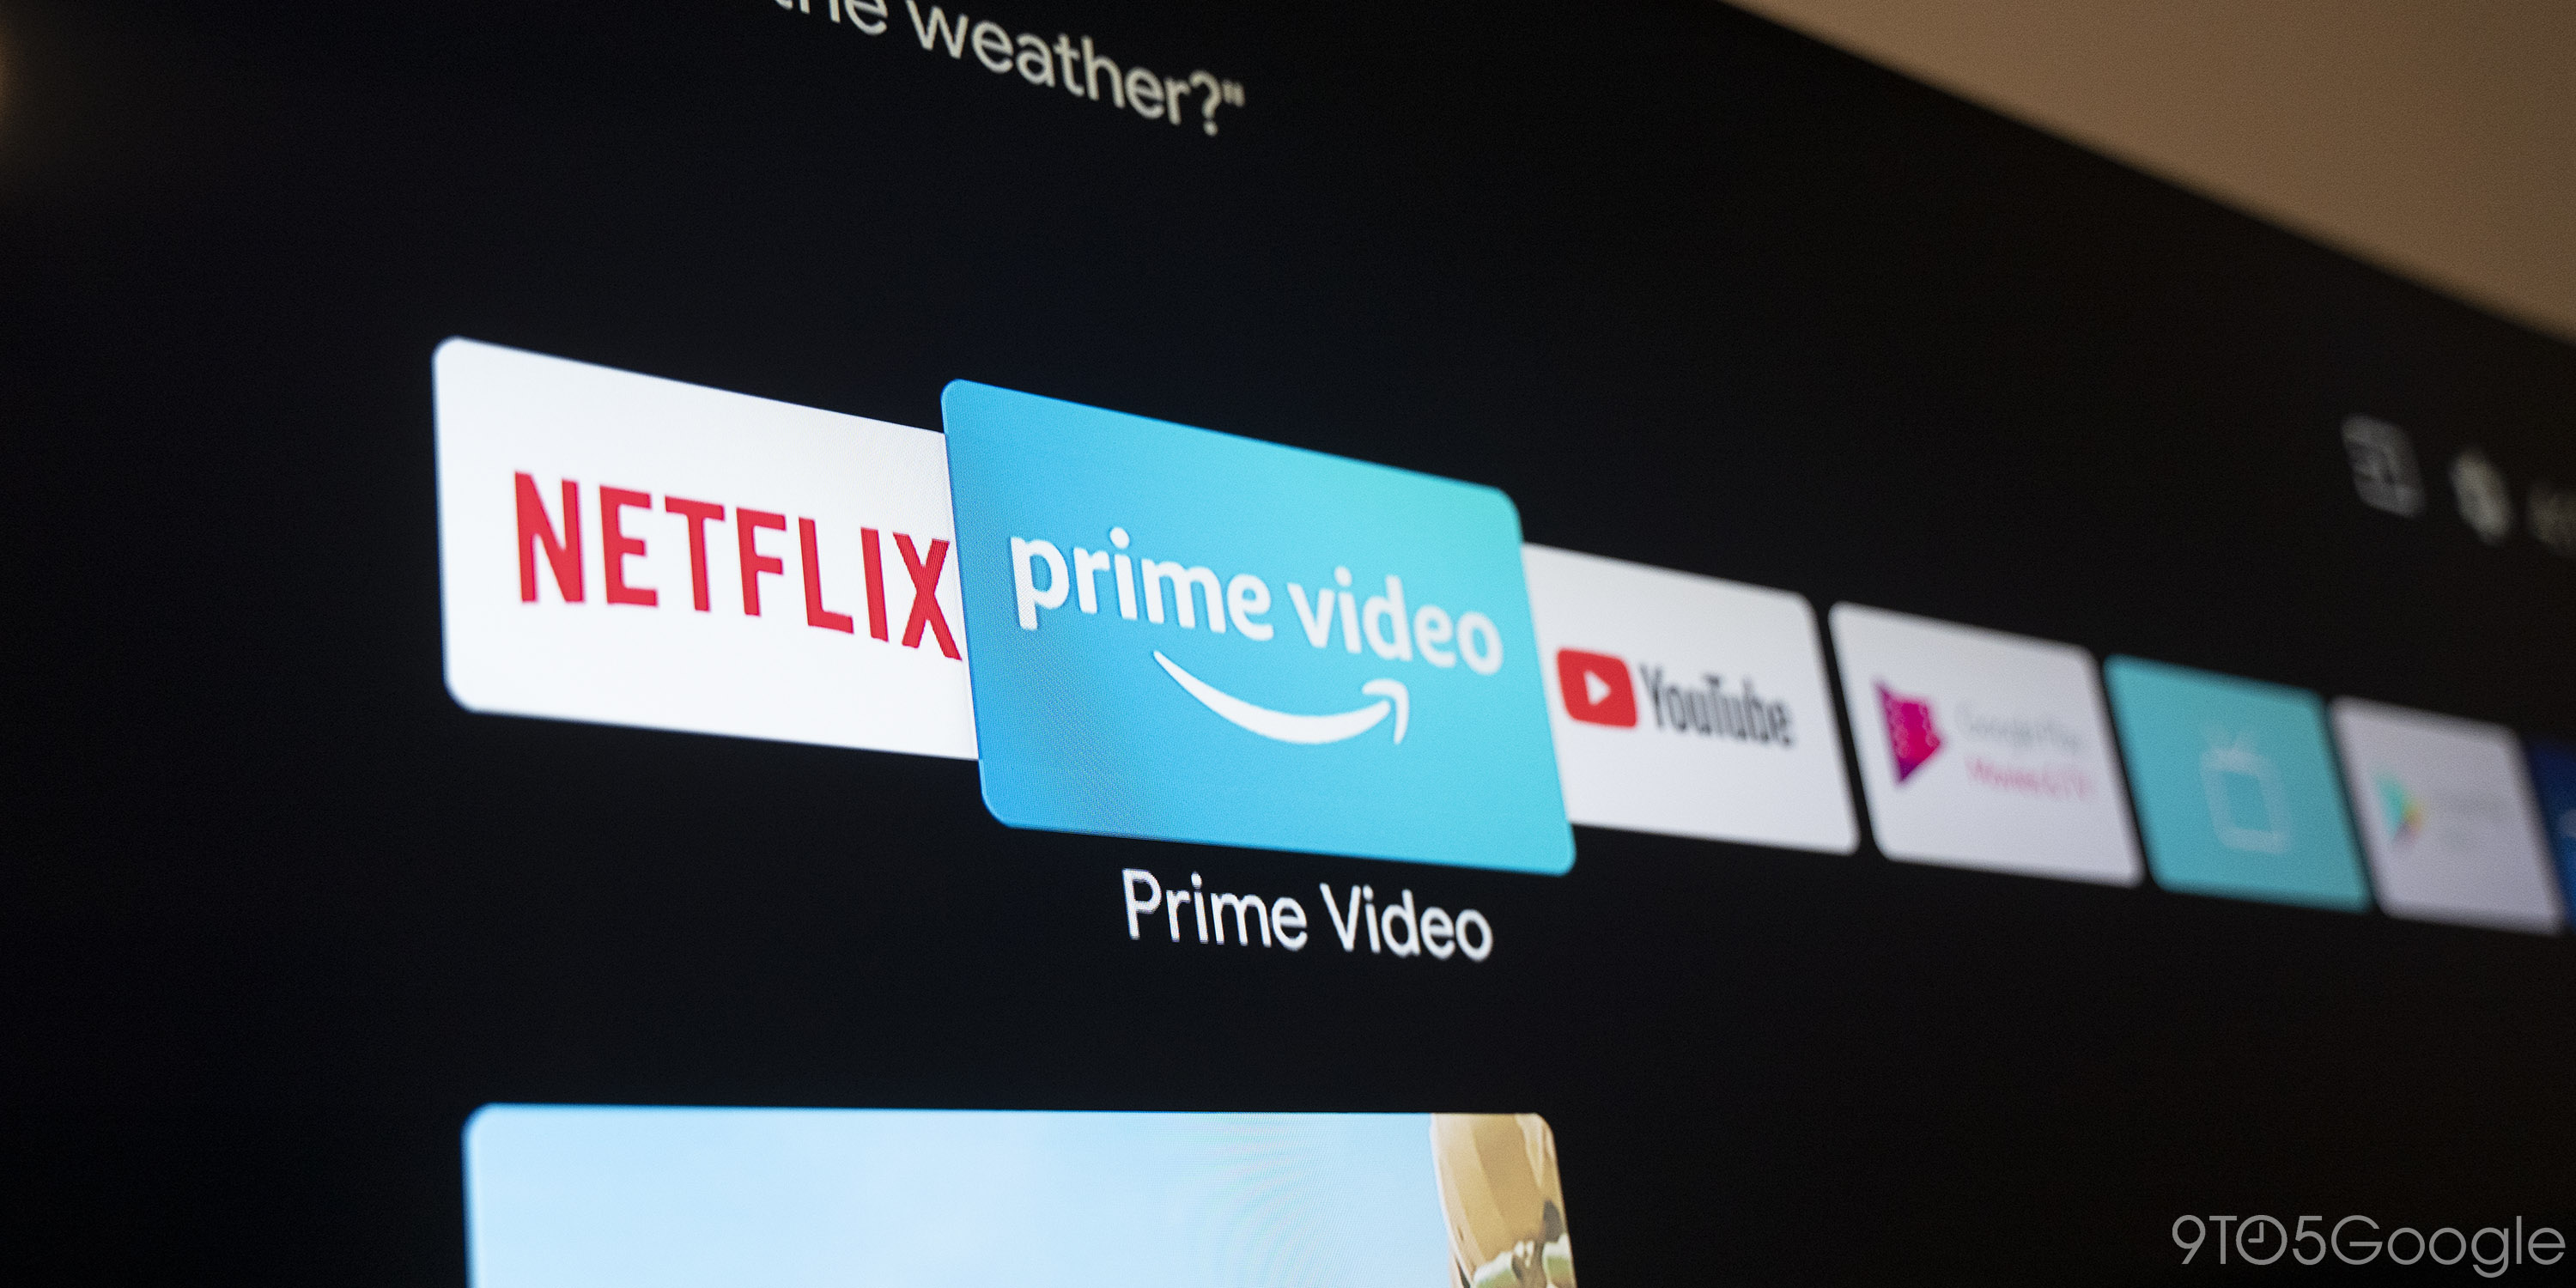 Redesigns Prime Video User Interface: New Features, Live TV Hub